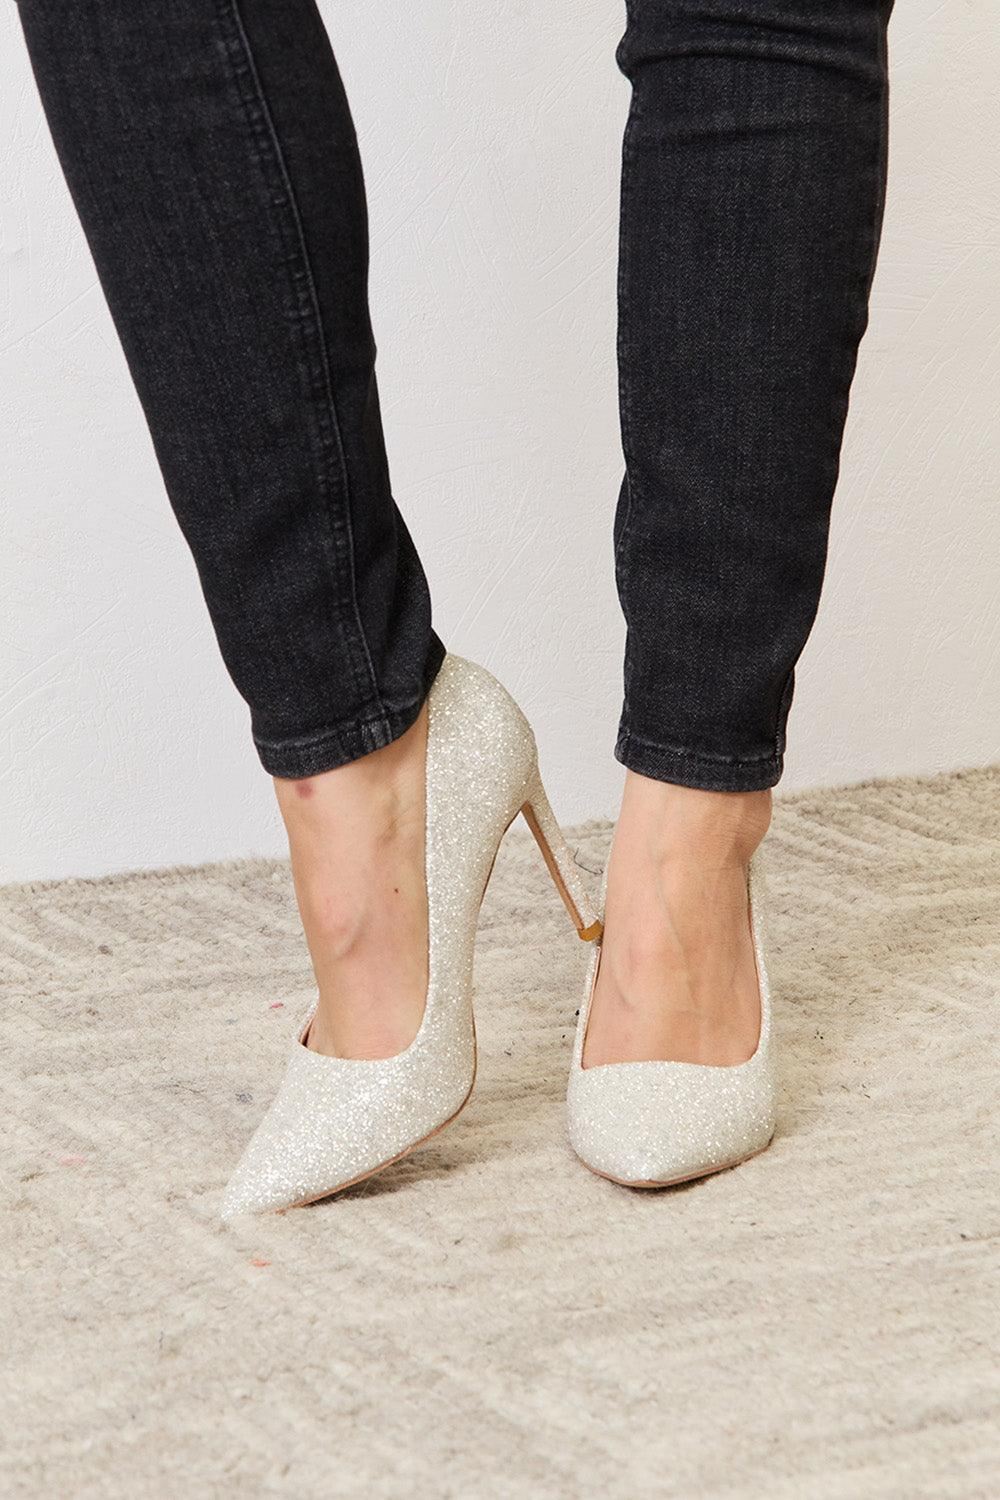 Pointed Toe High Heels - Inspired Eye Boutique